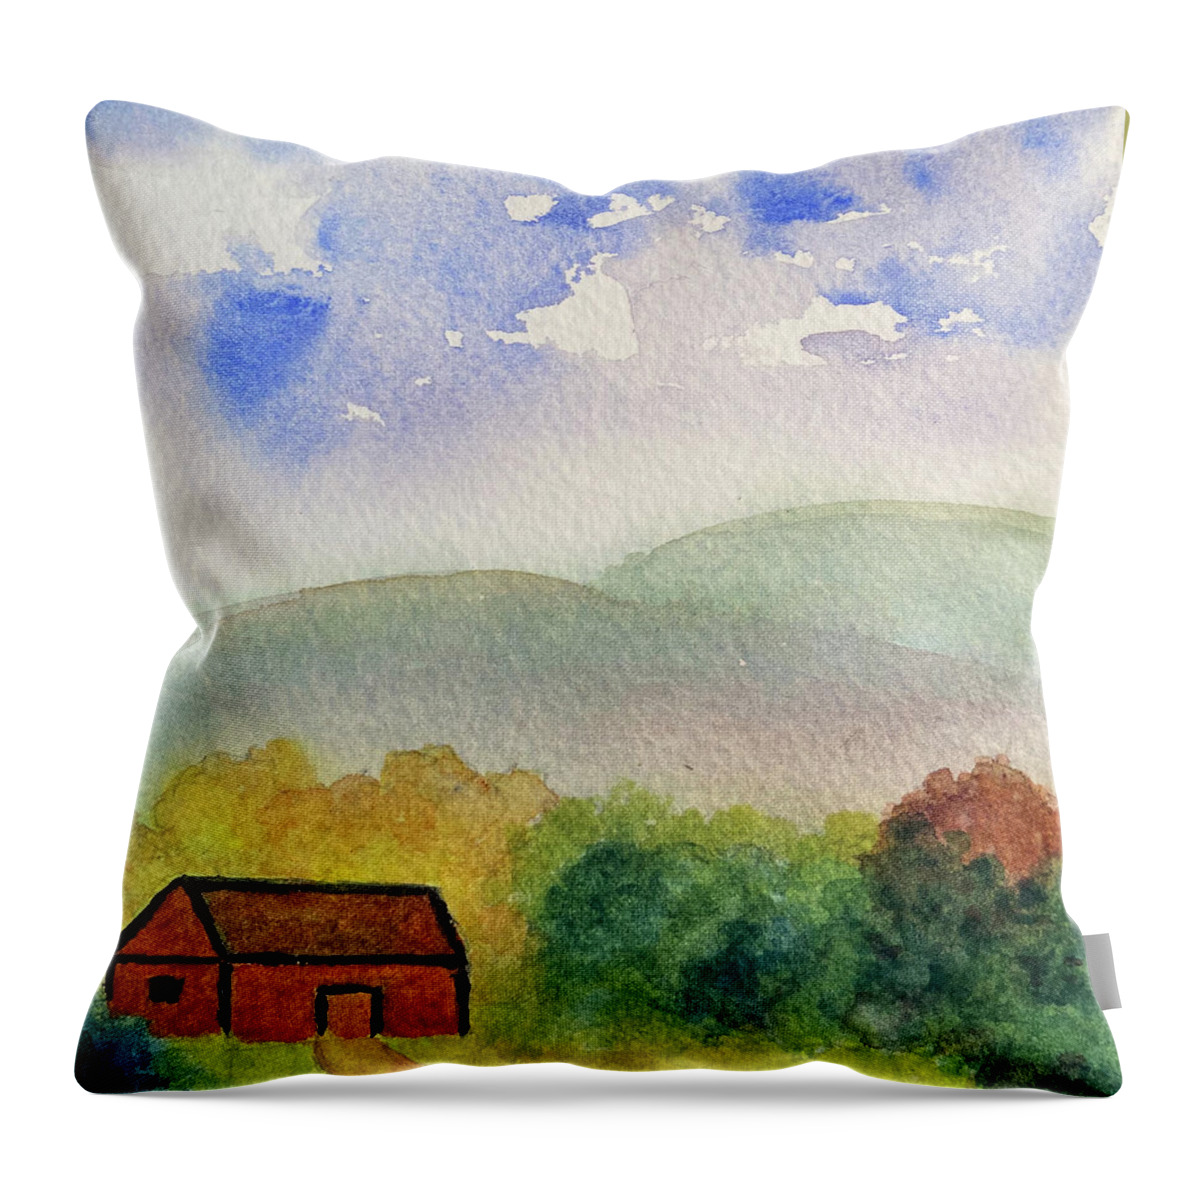 Berkshires Throw Pillow featuring the painting Home Tucked Into Hill by Anne Katzeff